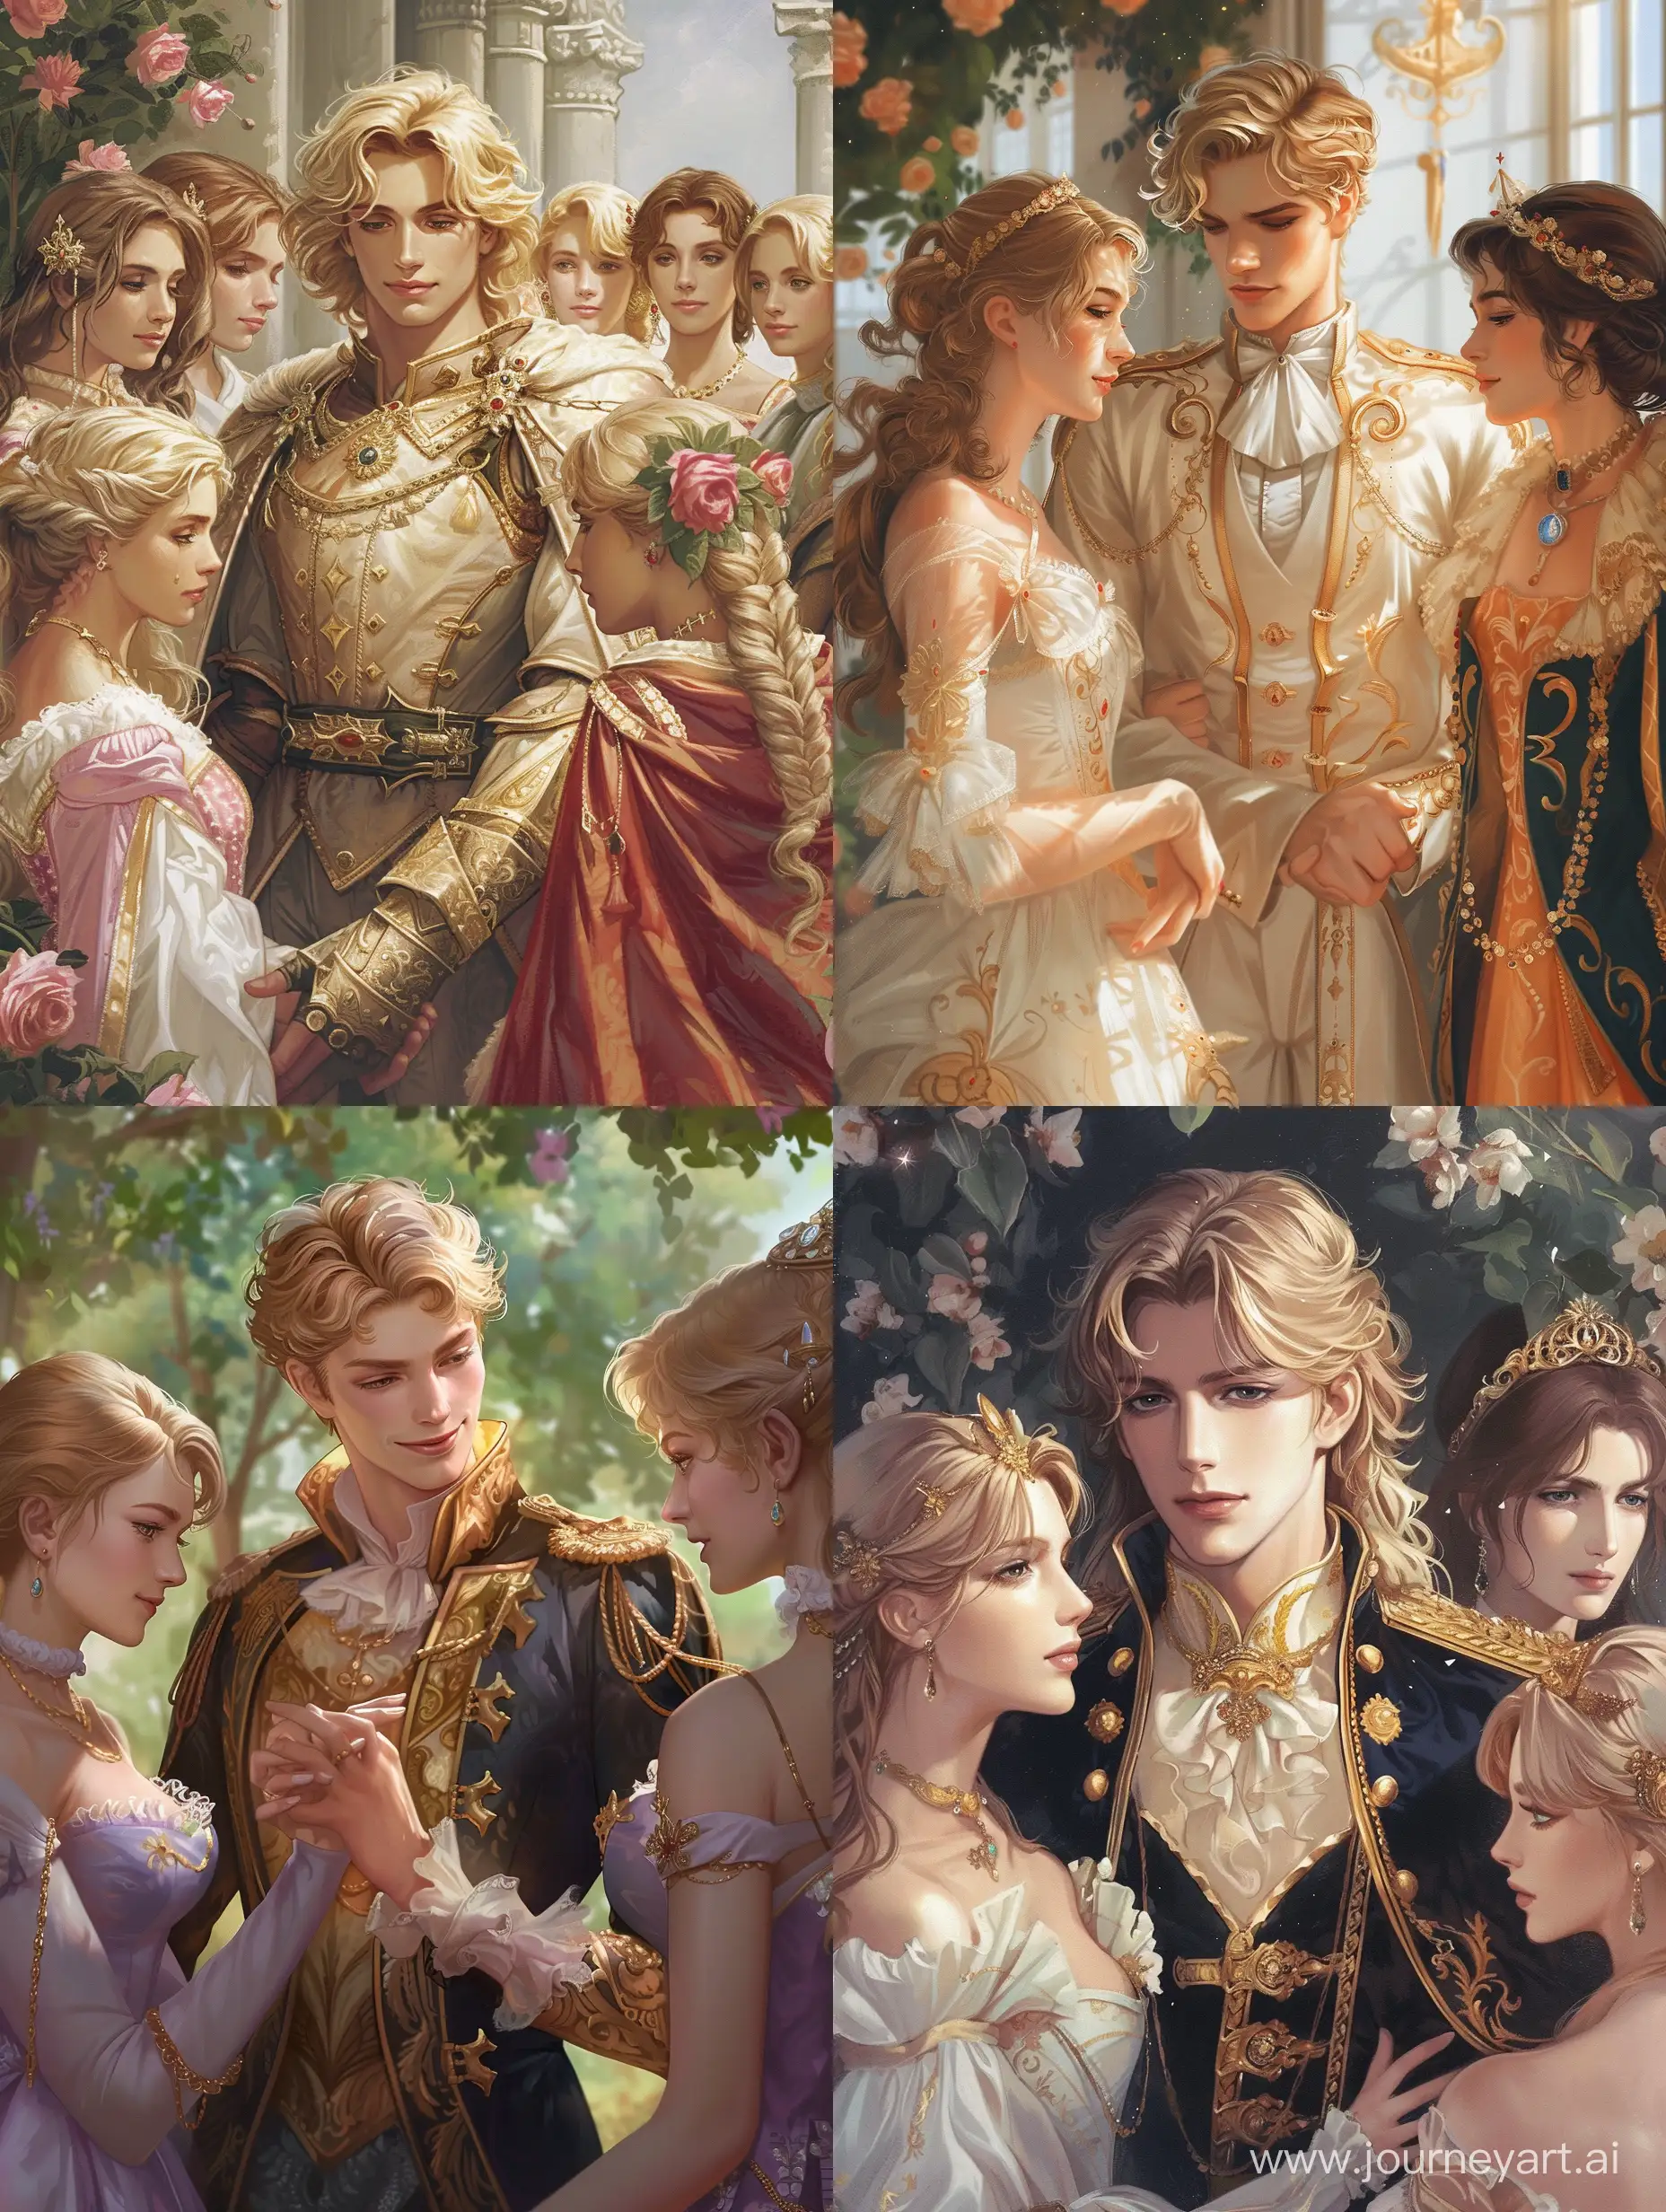 Fantasy romance, Prince with blond hair selecting brides for the prince